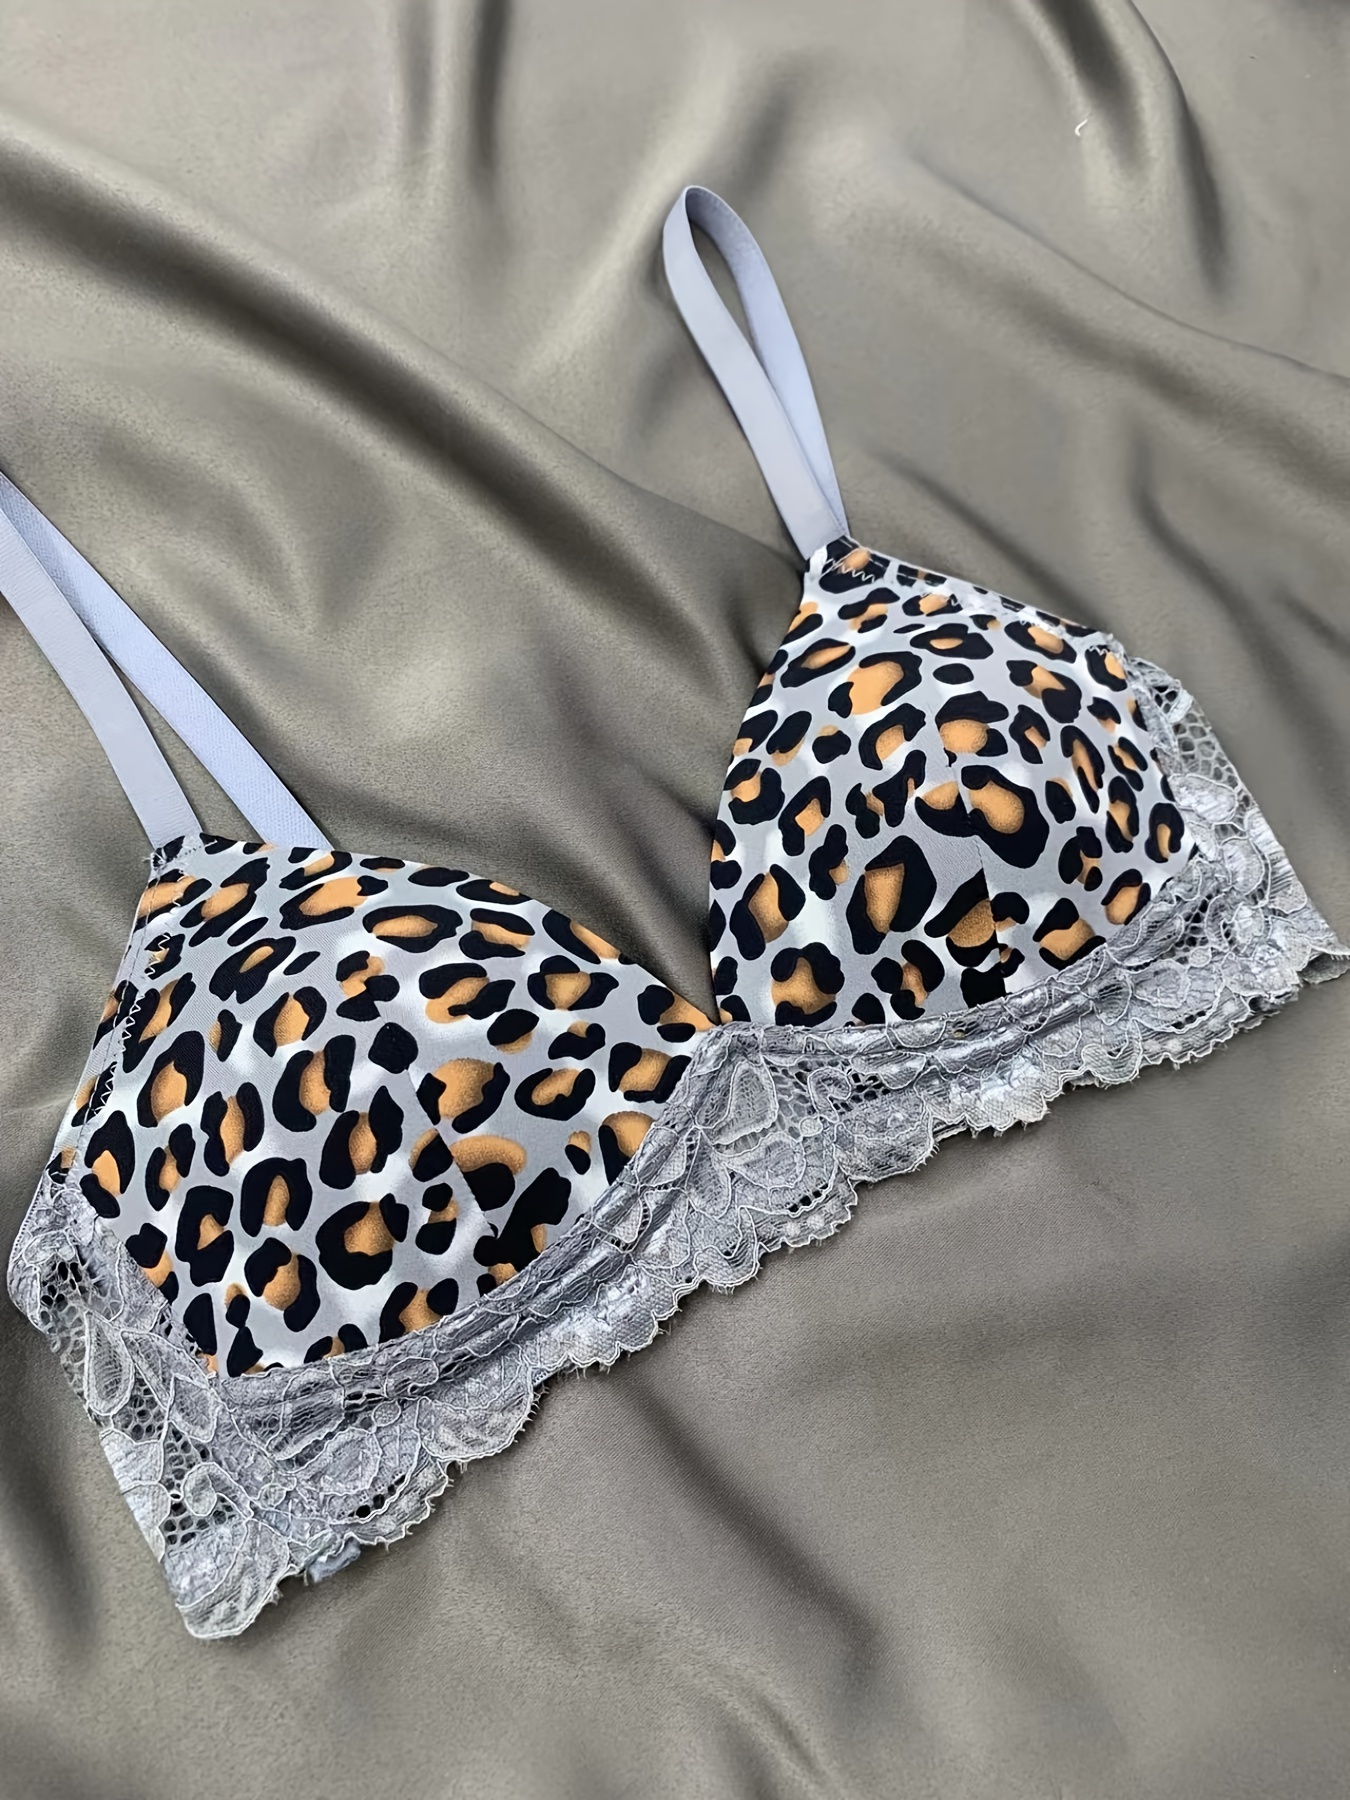 VAGA Leopard Adhesive Bra with Padding, Wireless Pushup Bras for